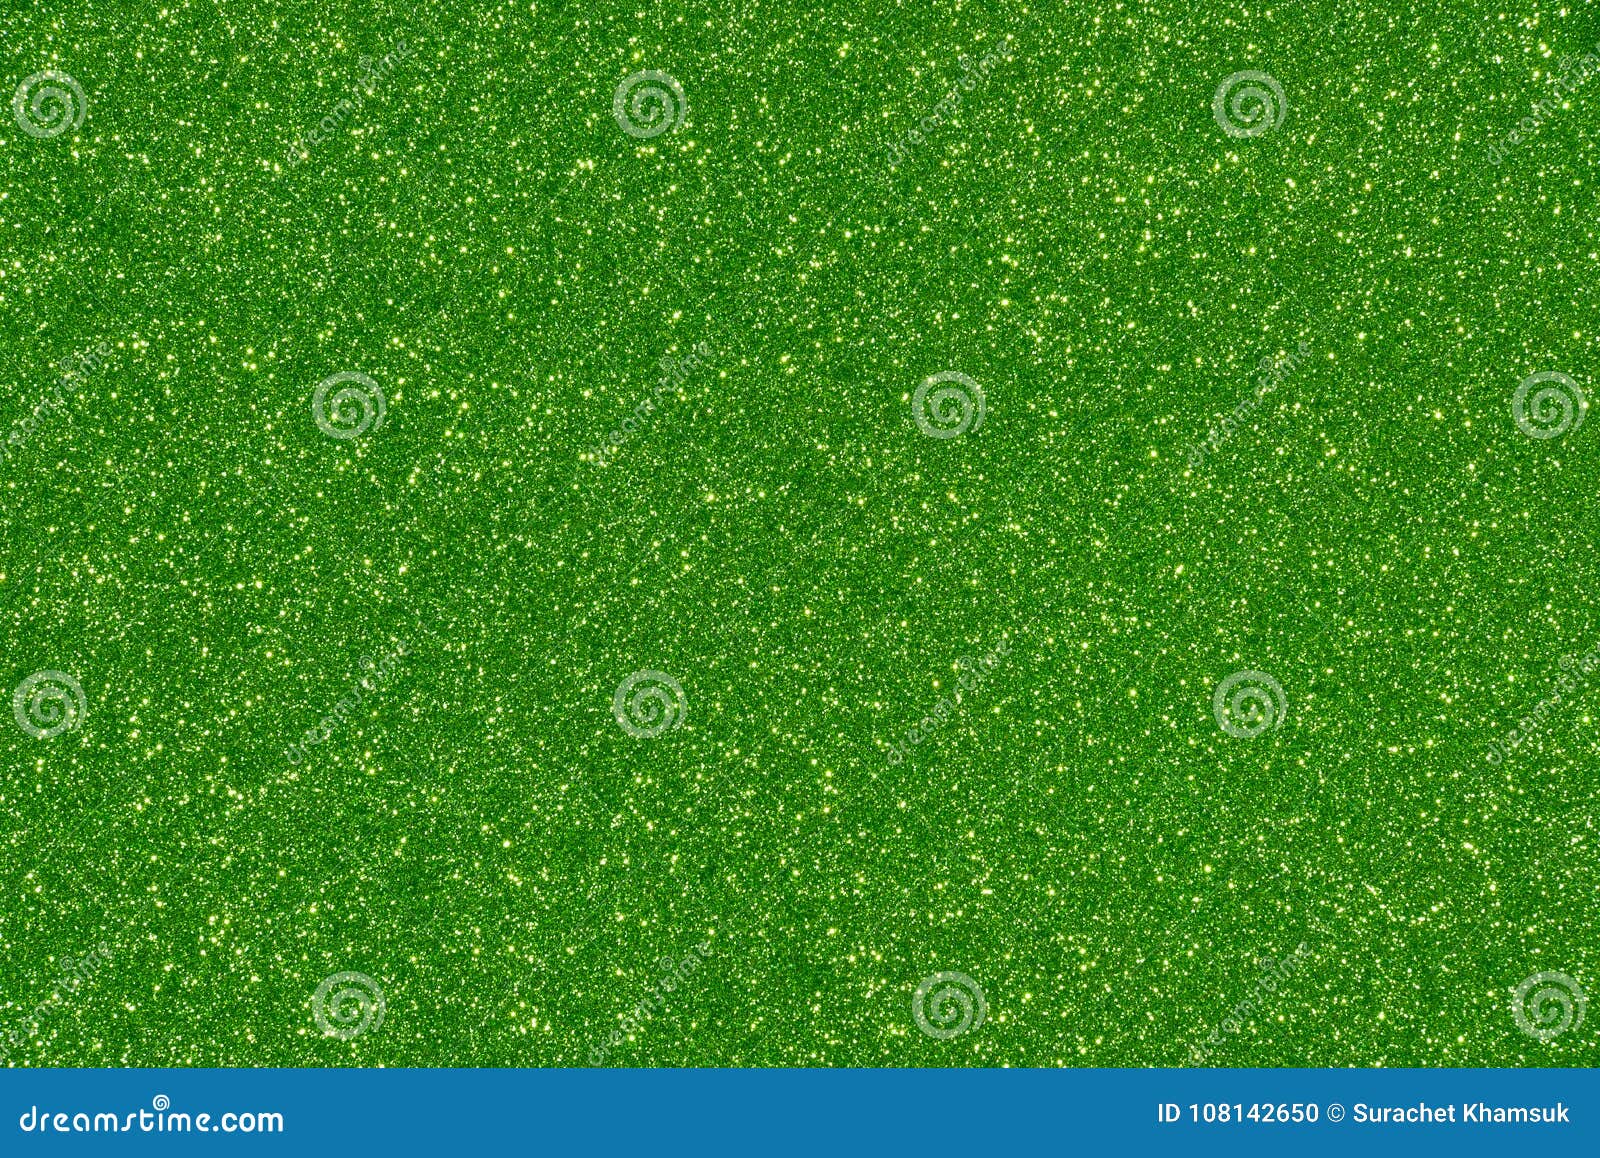 Green Glitter Texture Christmas Abstract Background Stock Photo 519665524